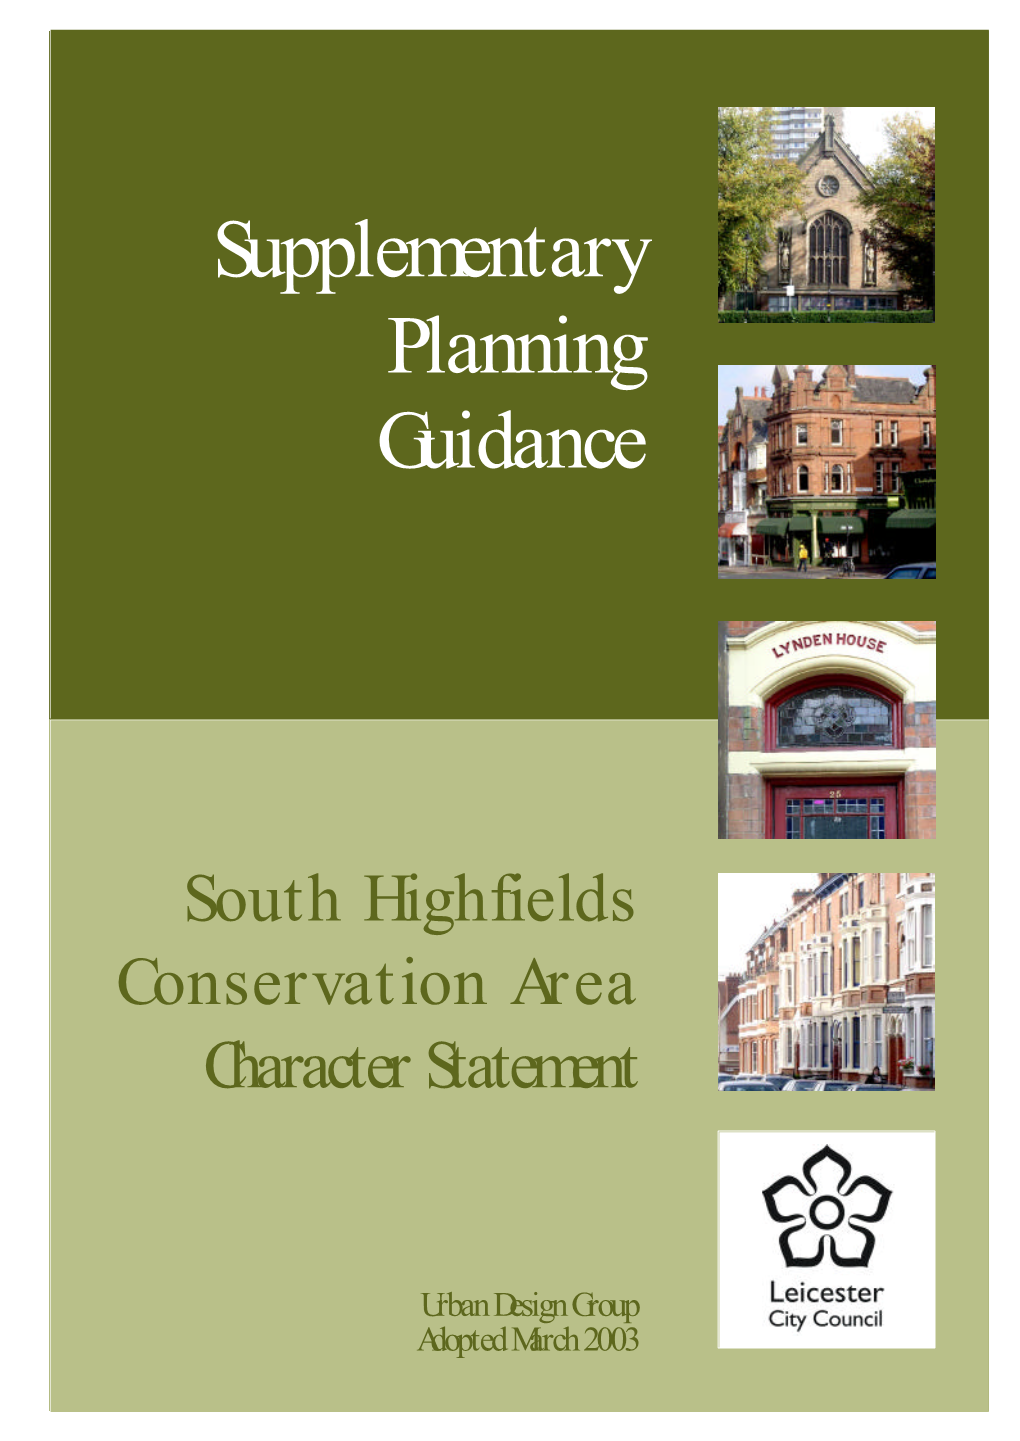 South Highfields Conservation Area Character Statement